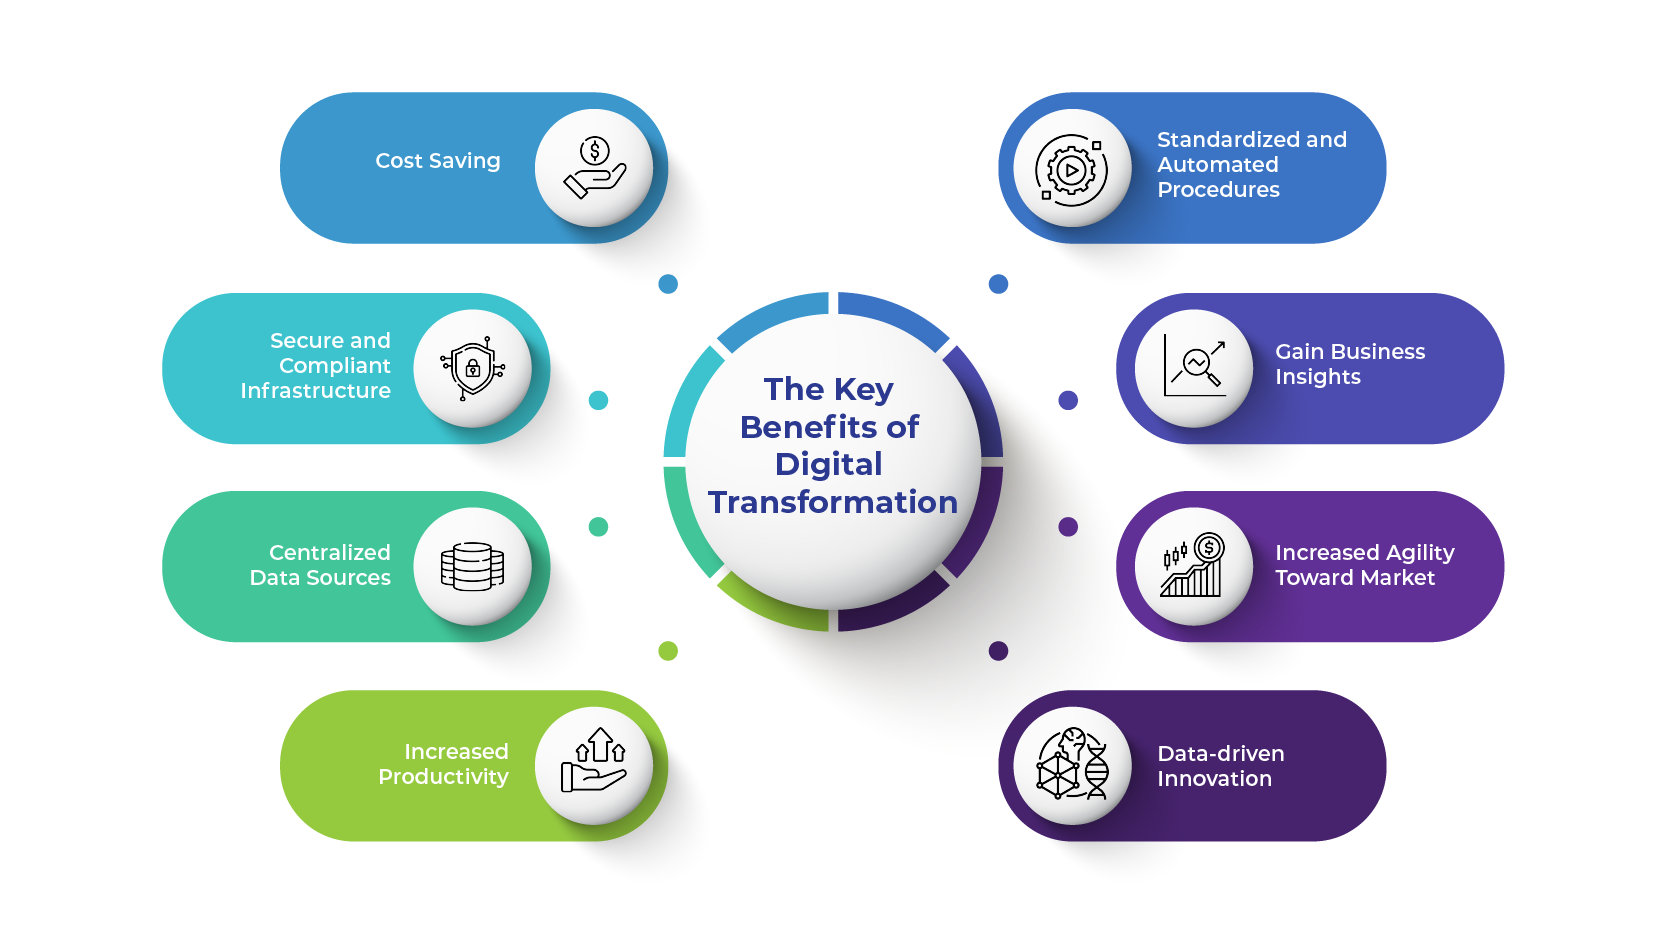 Scope and Benefits of Digital Transformation